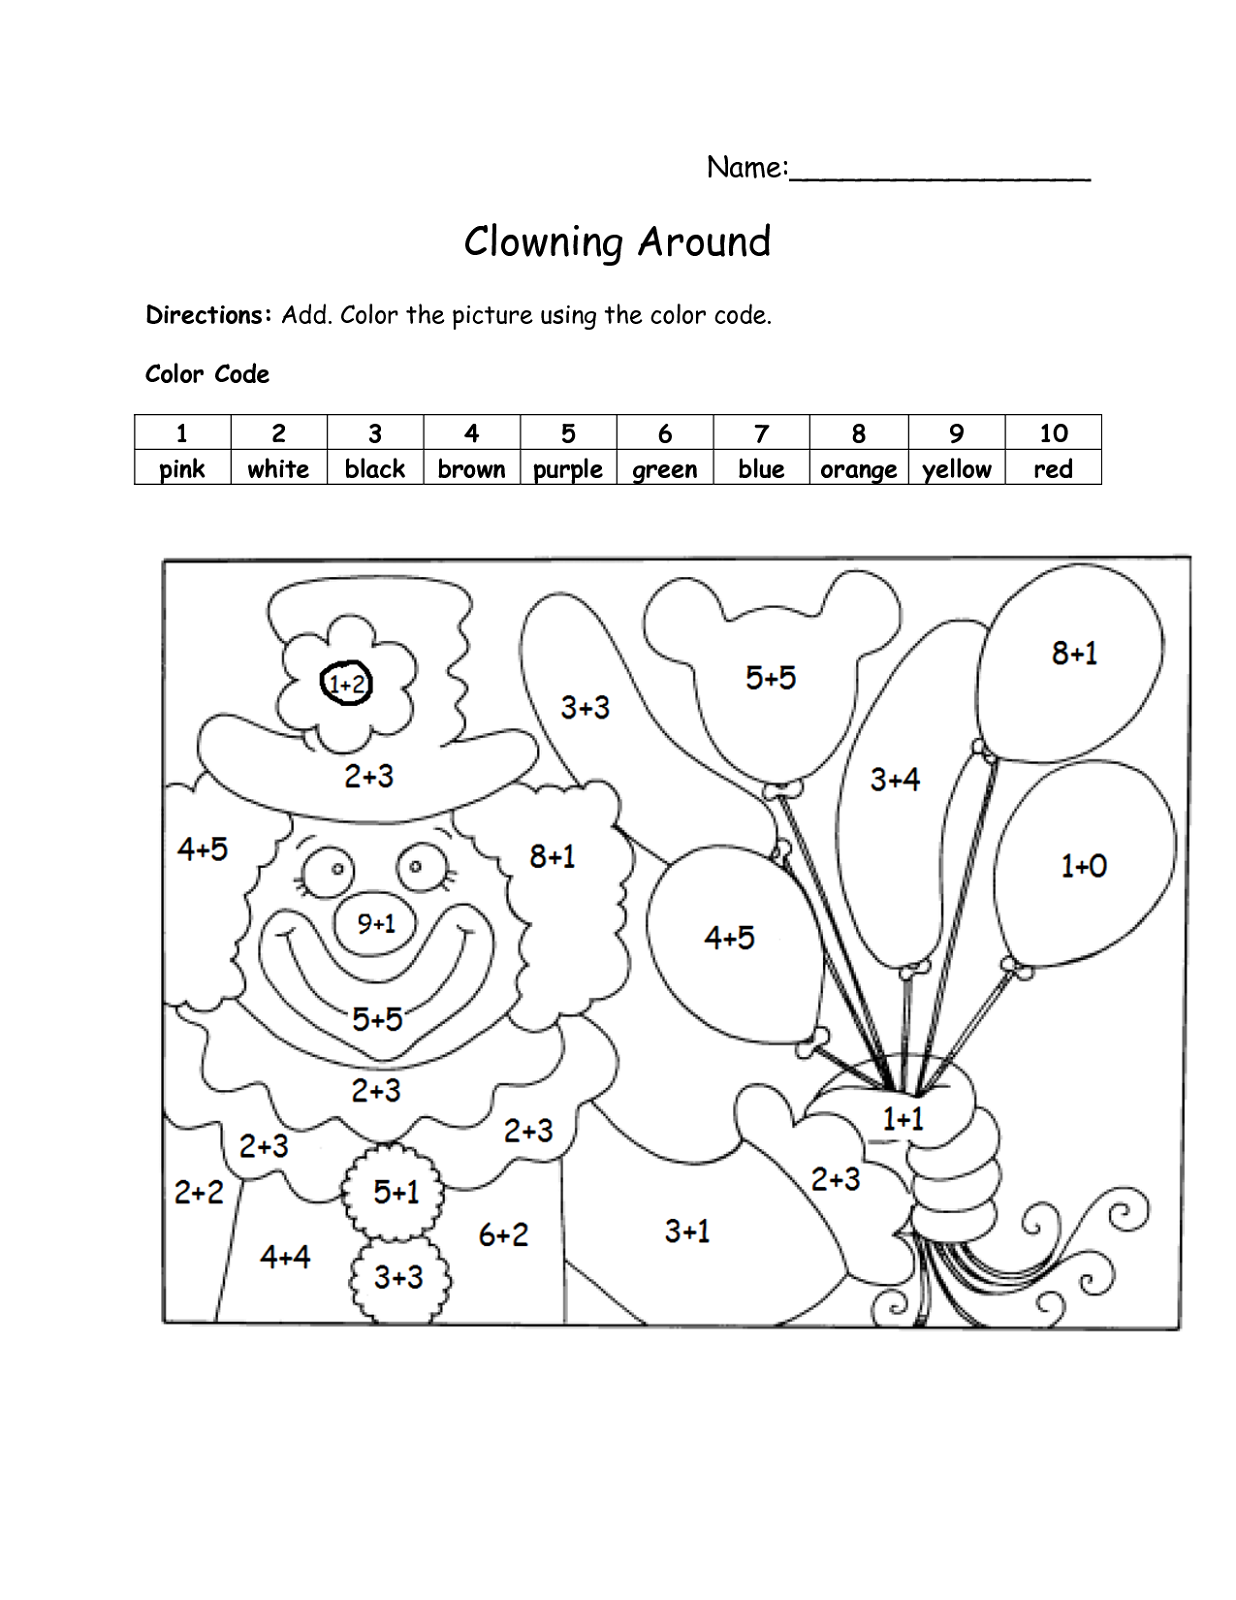 color-by-numbers-worksheets-clown